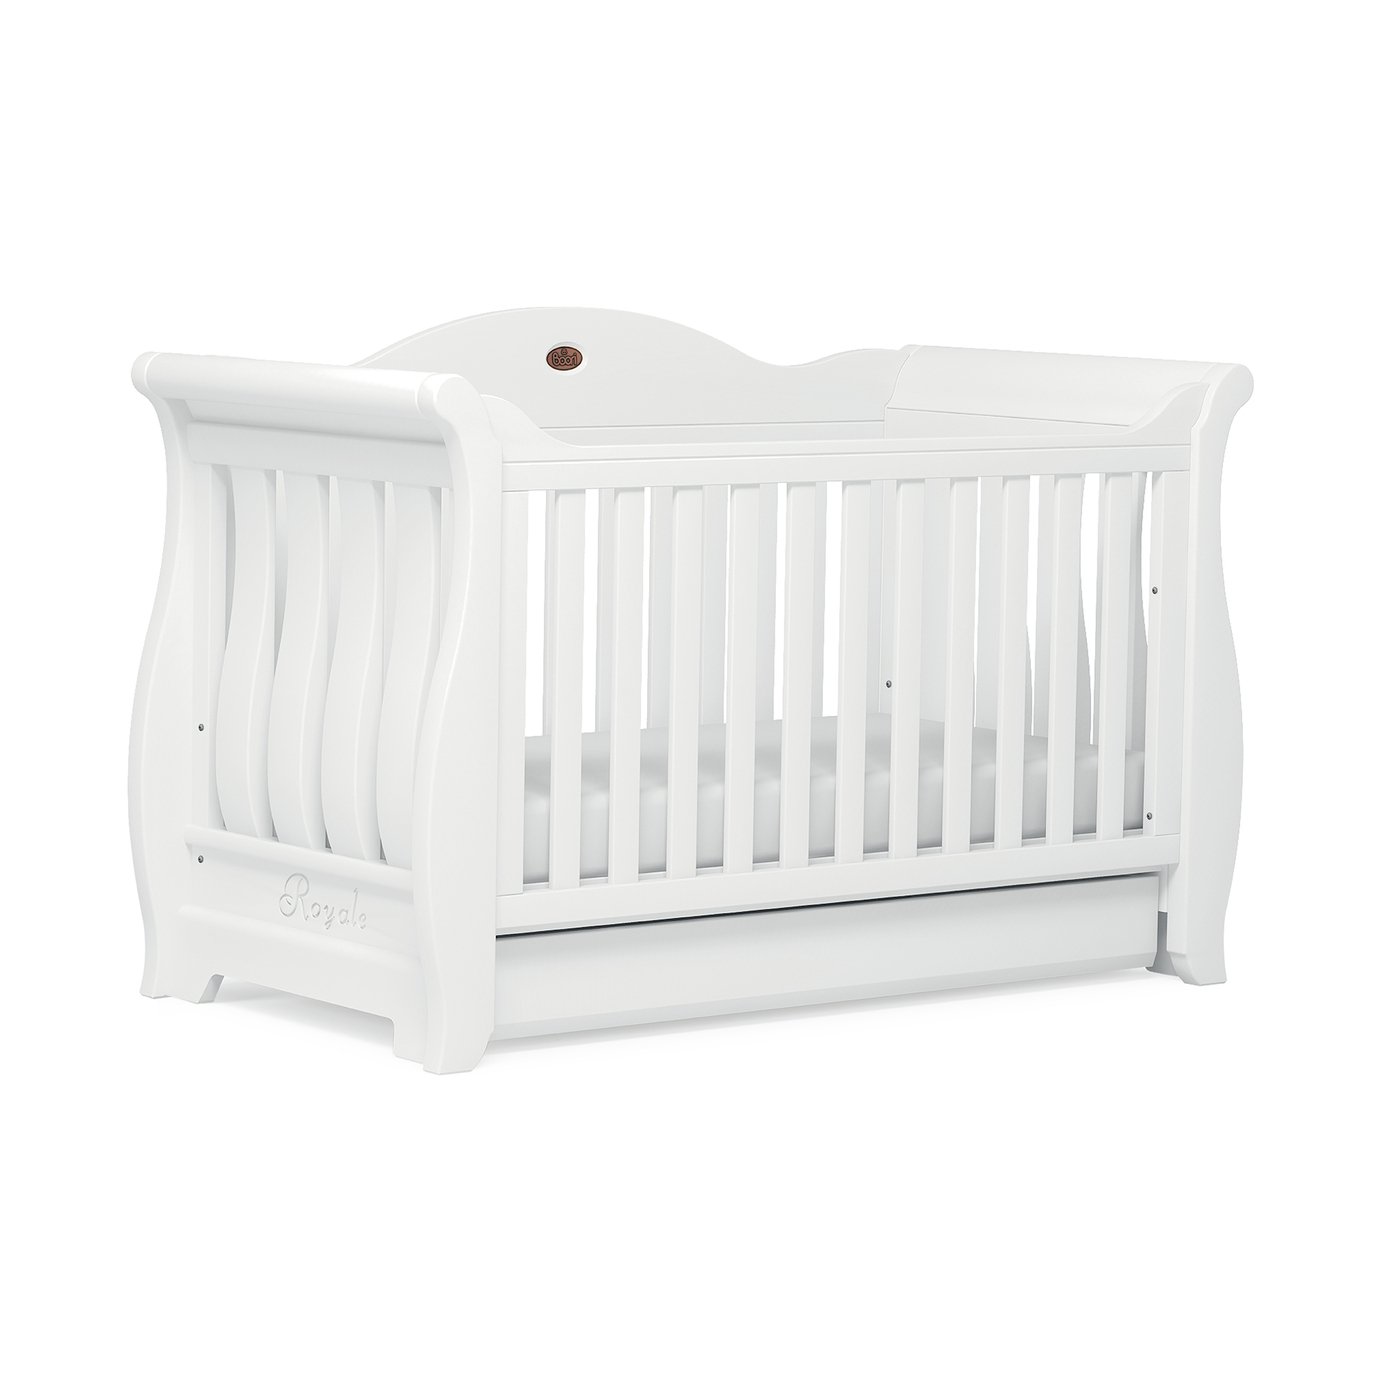 Boori Sleigh Royale Cot Bed - White